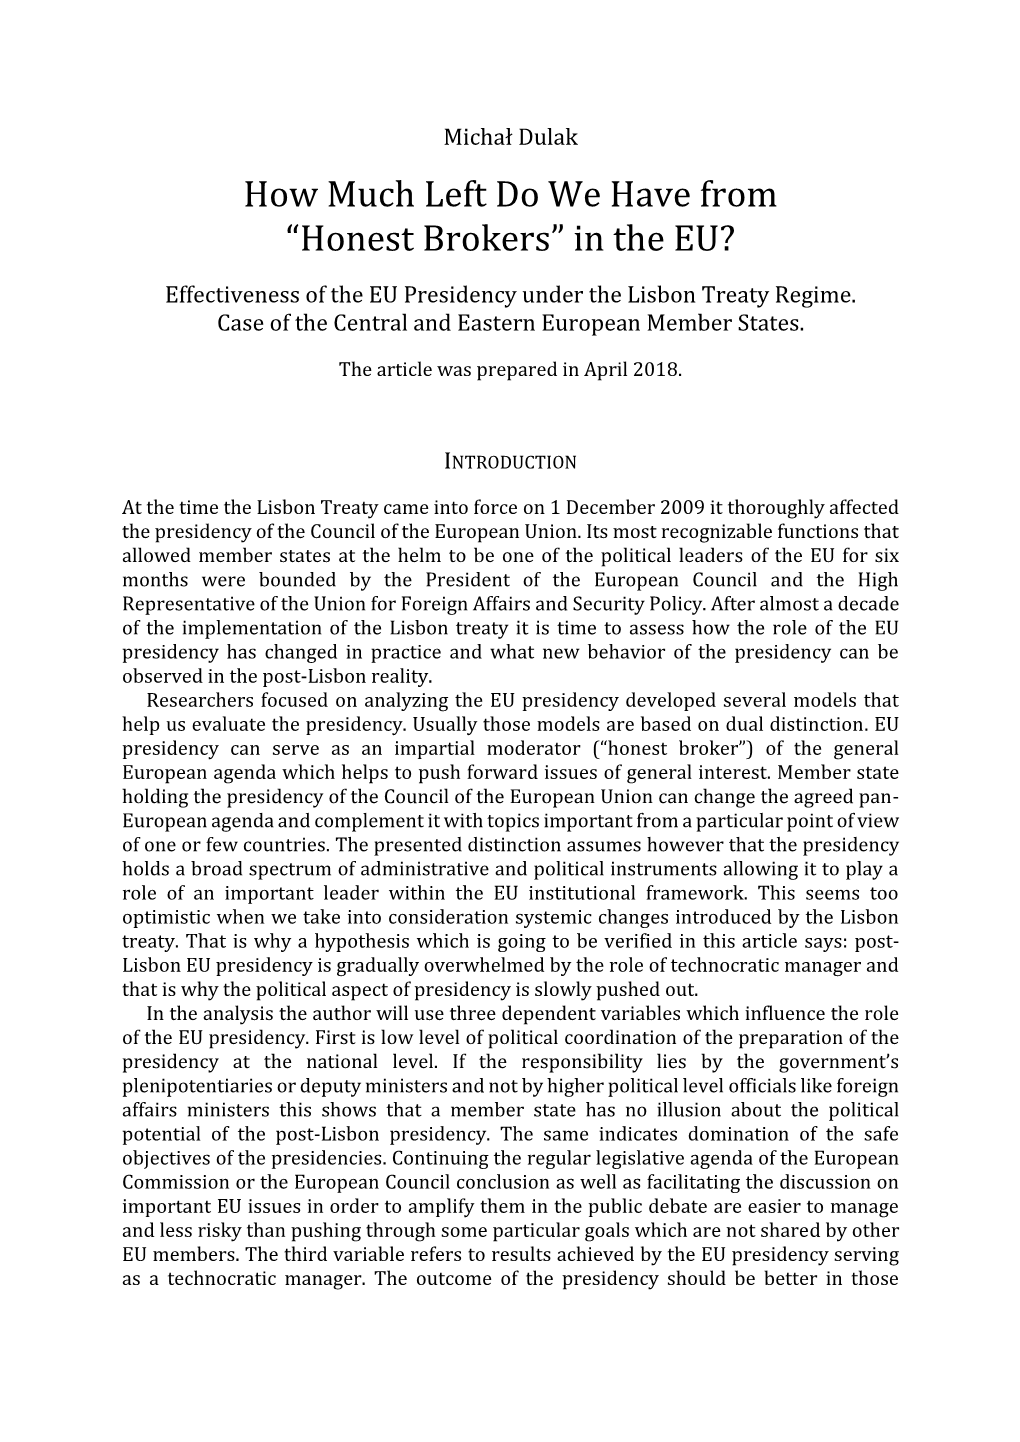 How Much Left Do We Have from “Honest Brokers” in the EU?